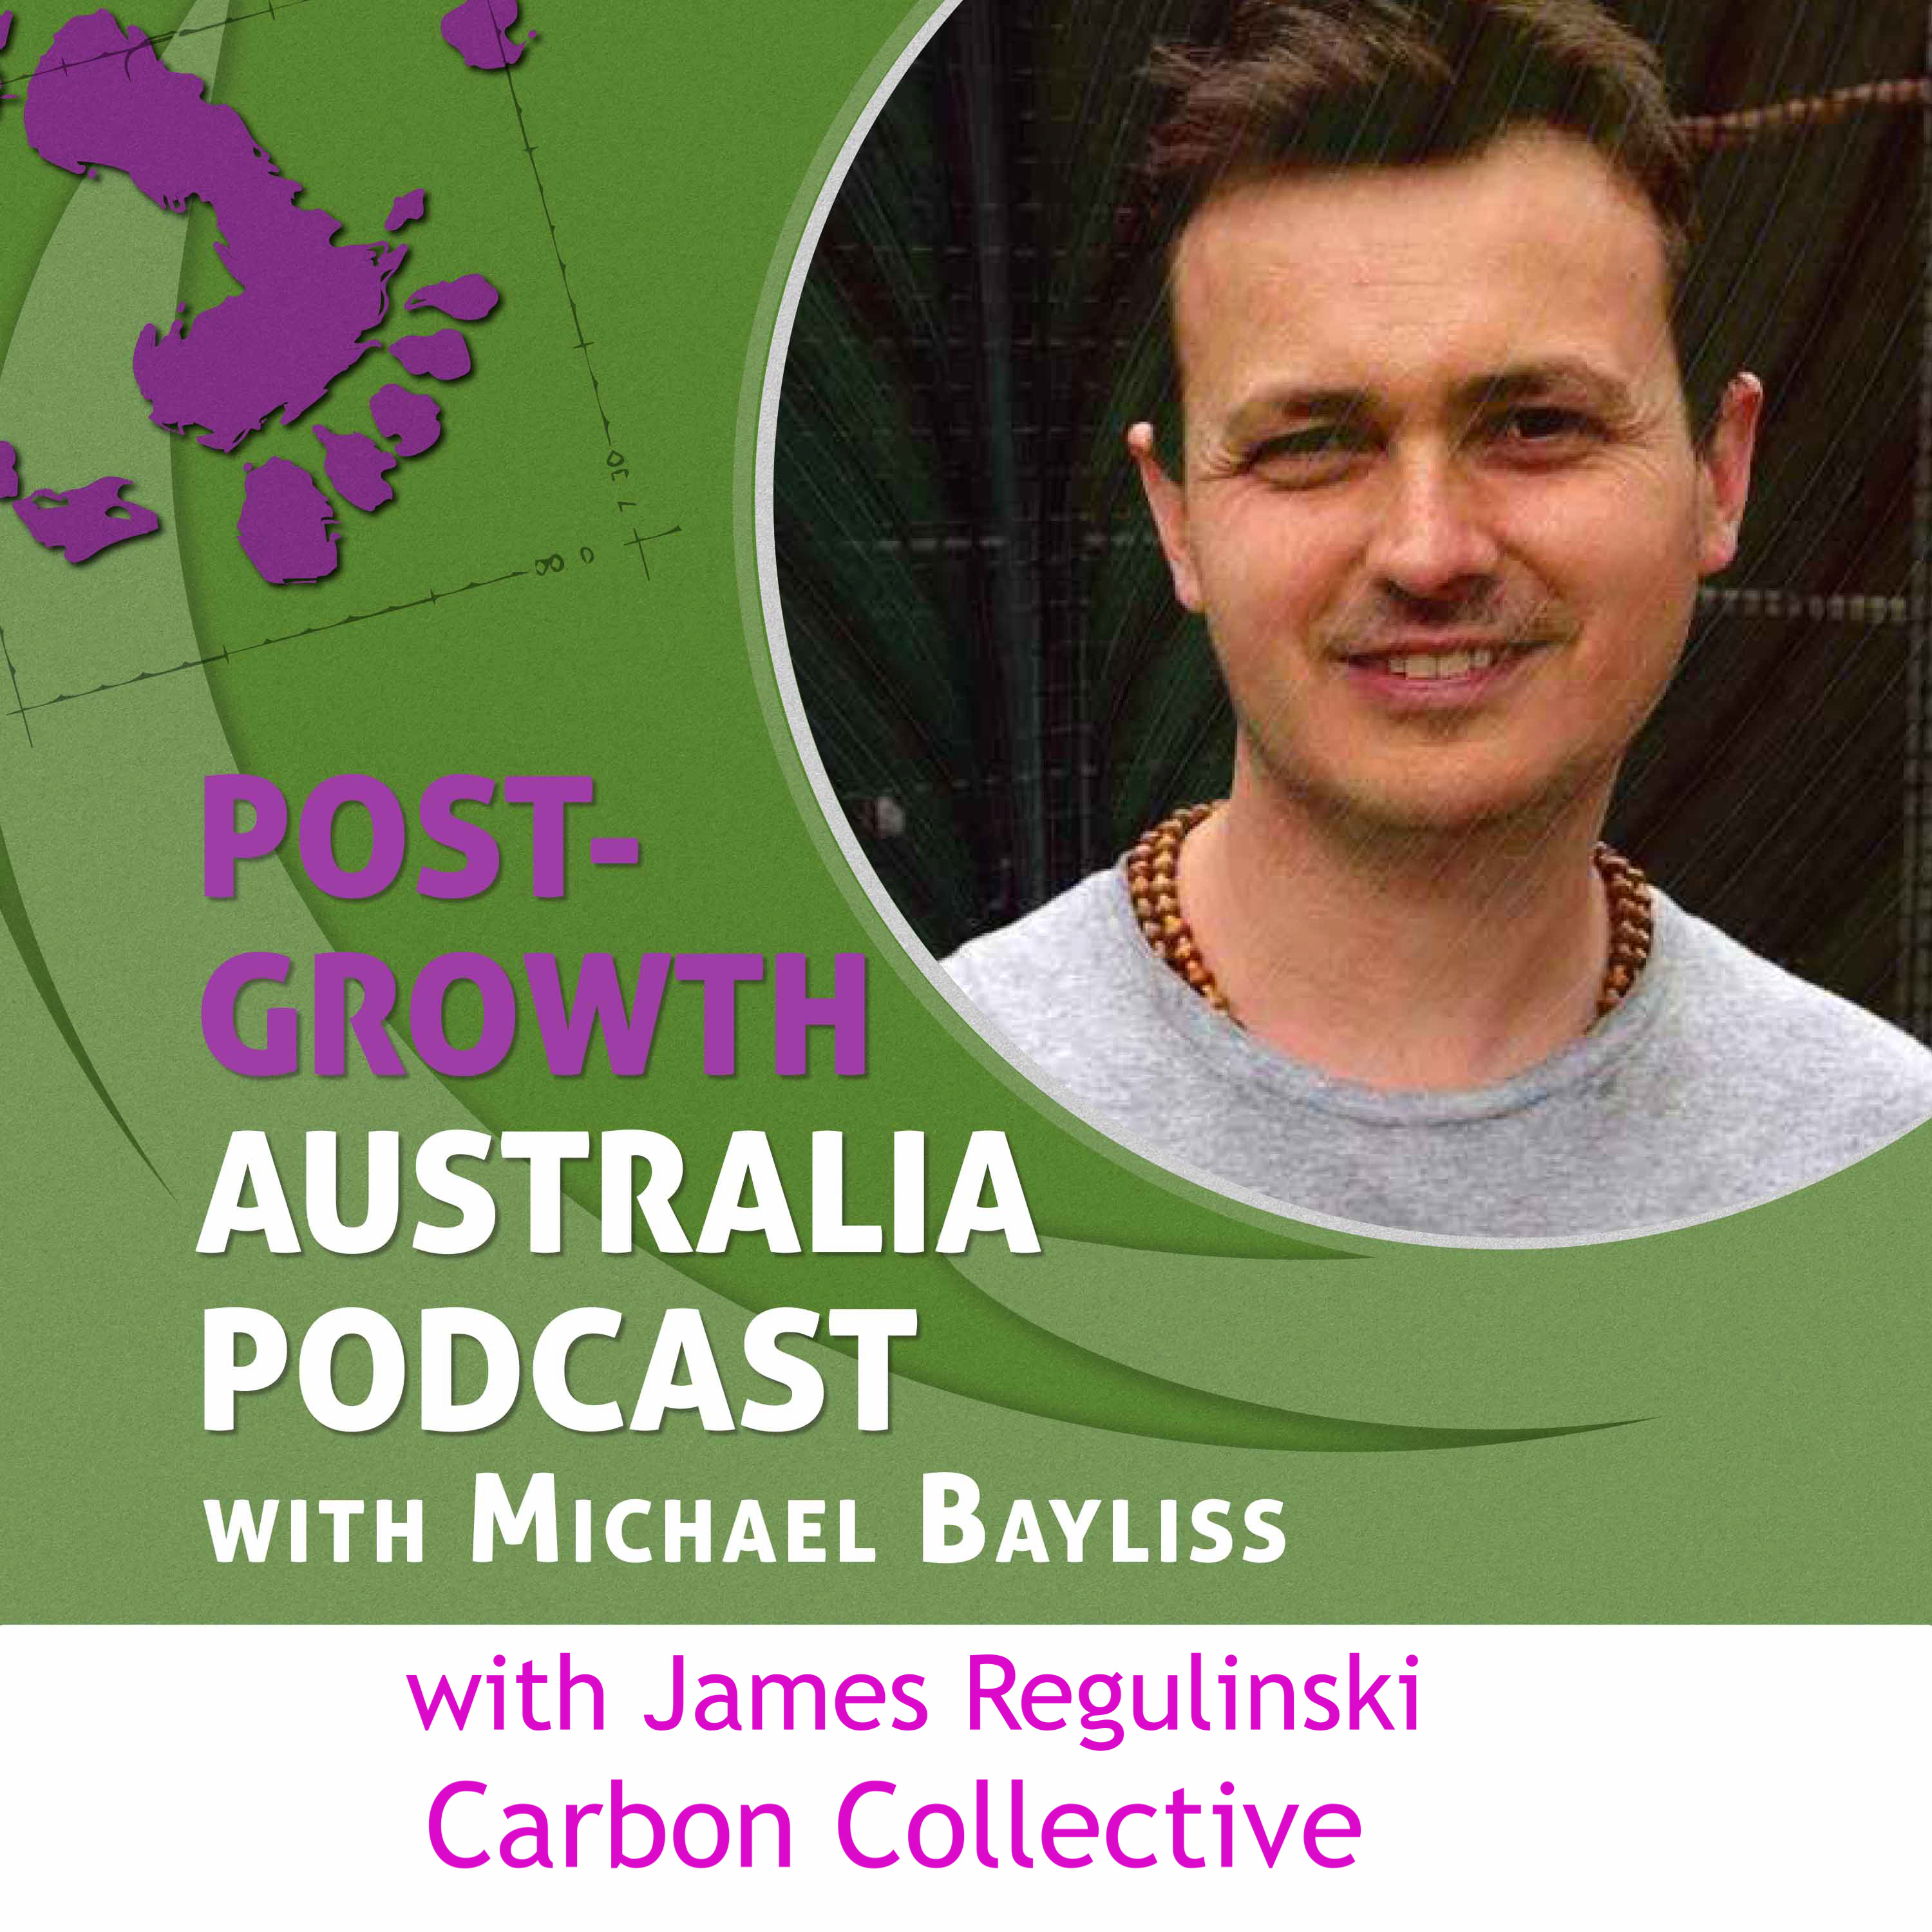 Solving climate change through ethical investment - with James Regulinski from Carbon Collective